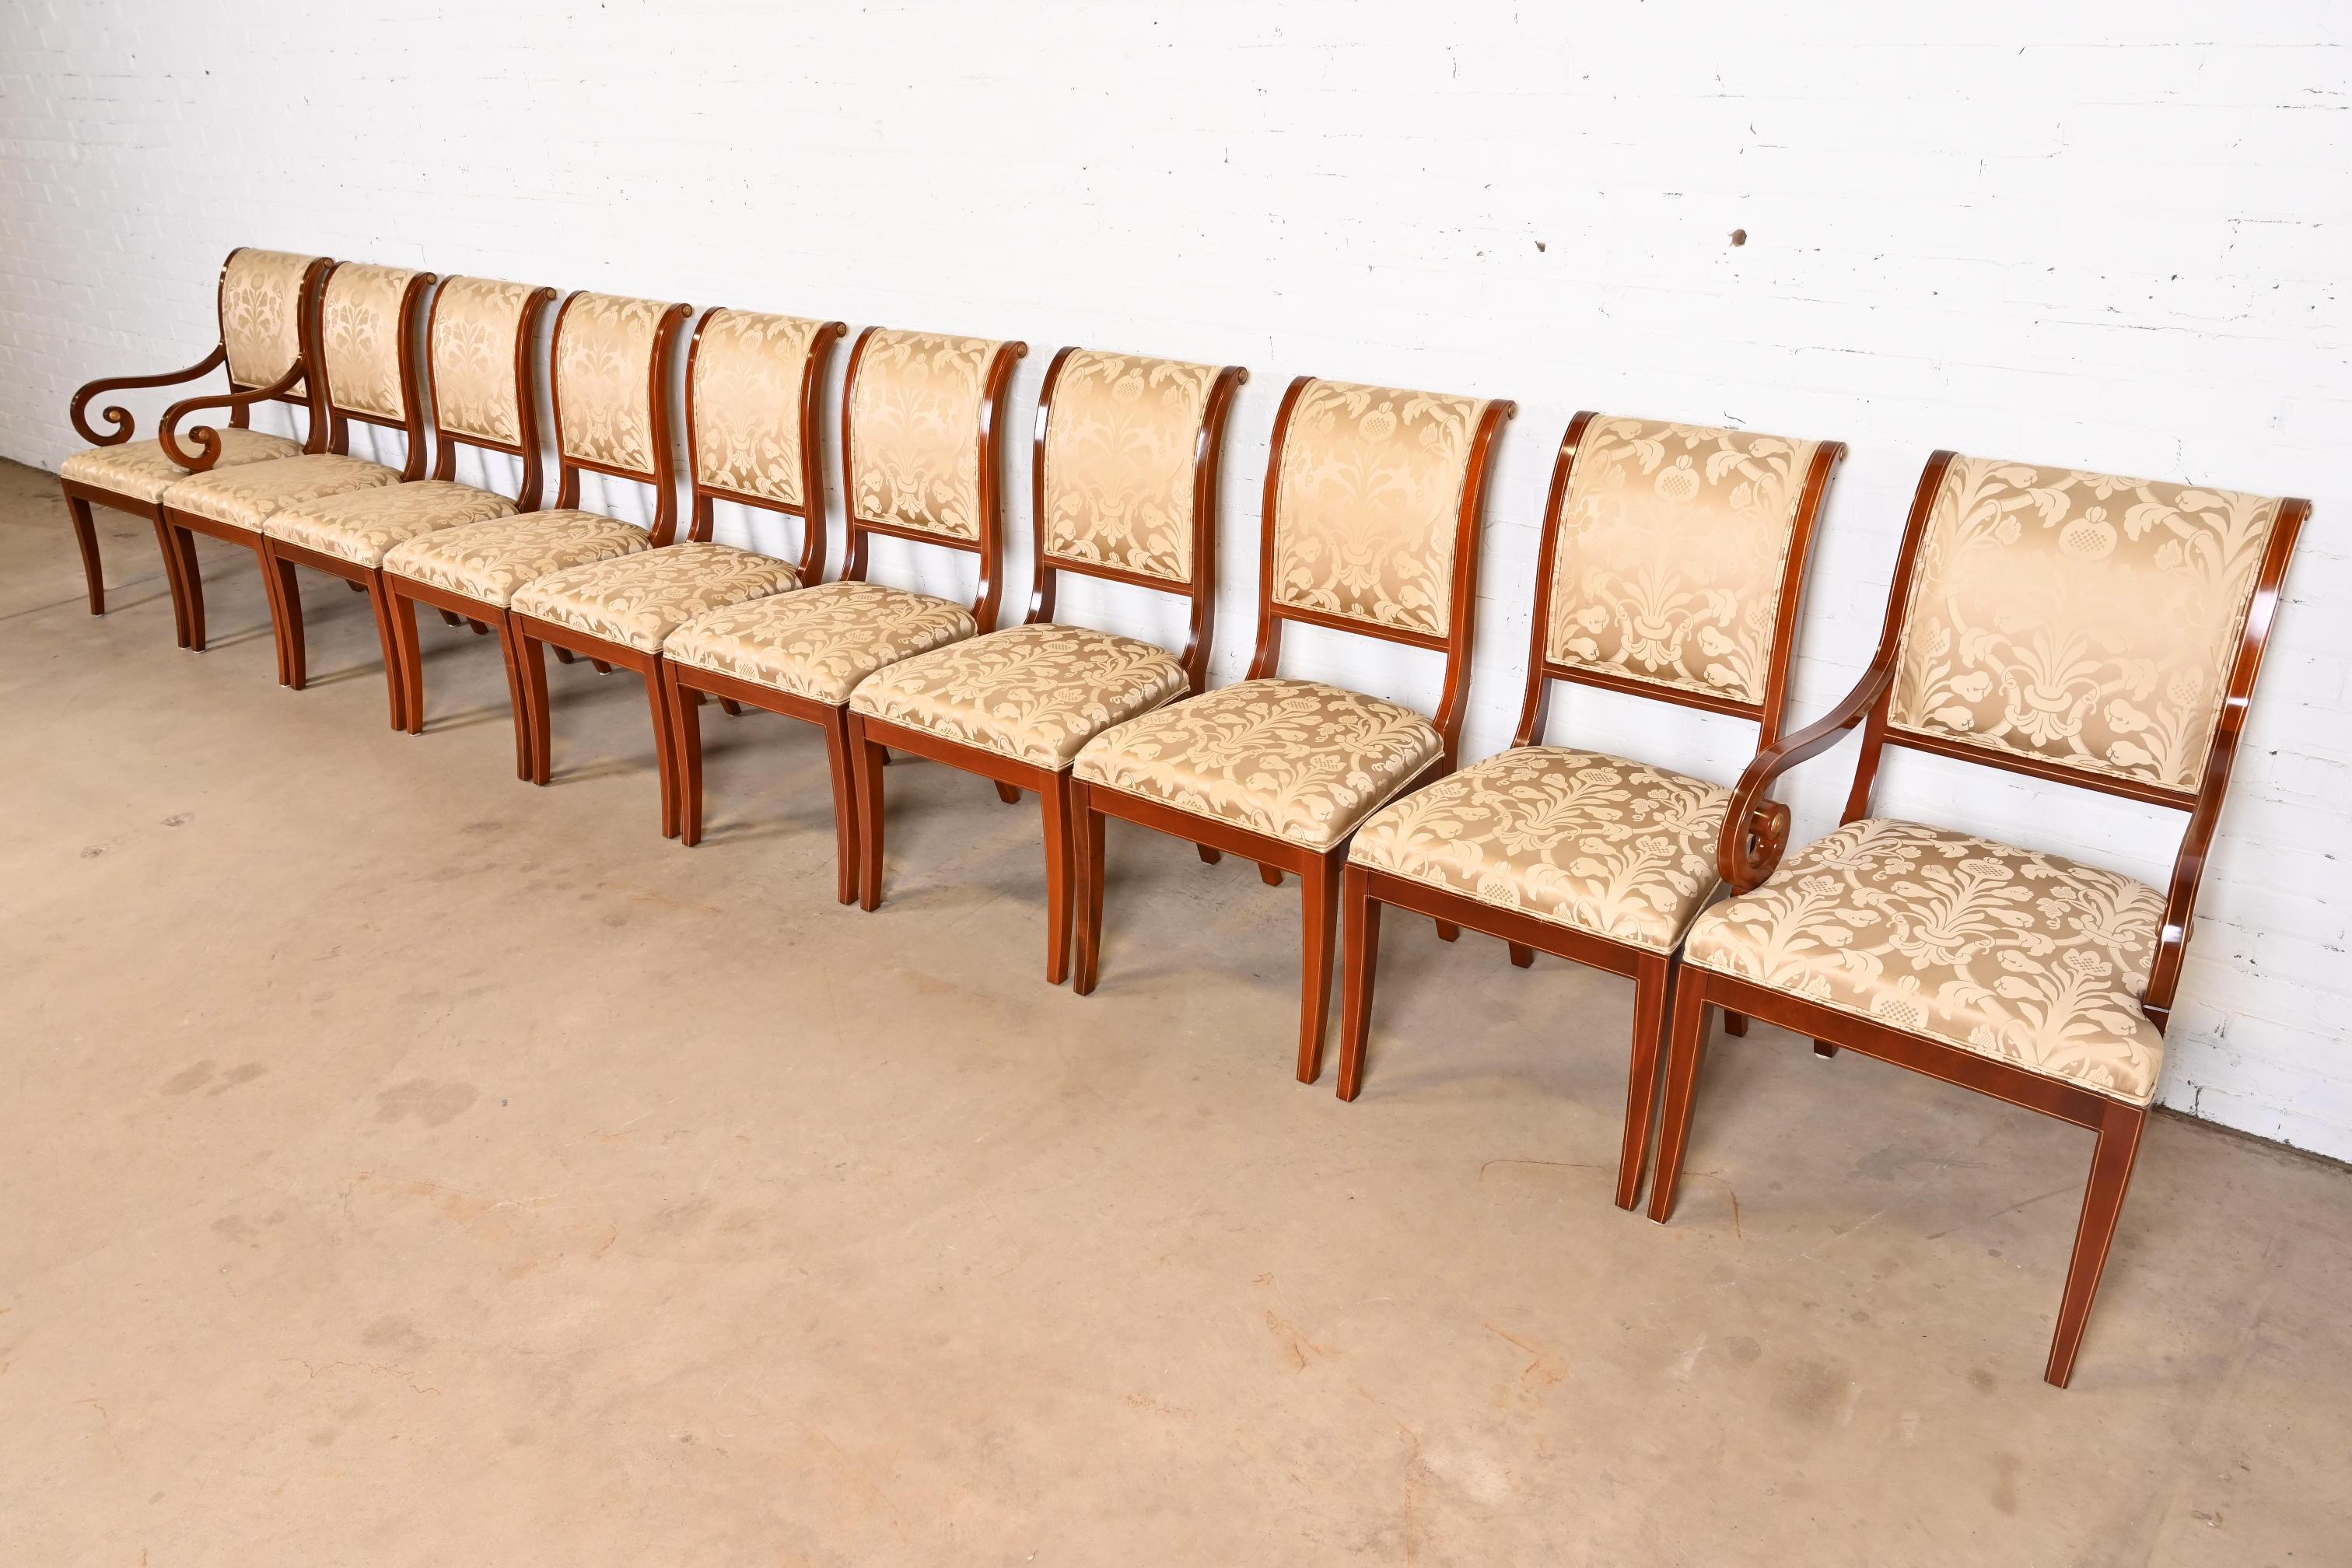 20th Century Kindel Furniture Regency Carved Mahogany and Gold Gilt Dining Chairs, Set of Ten For Sale